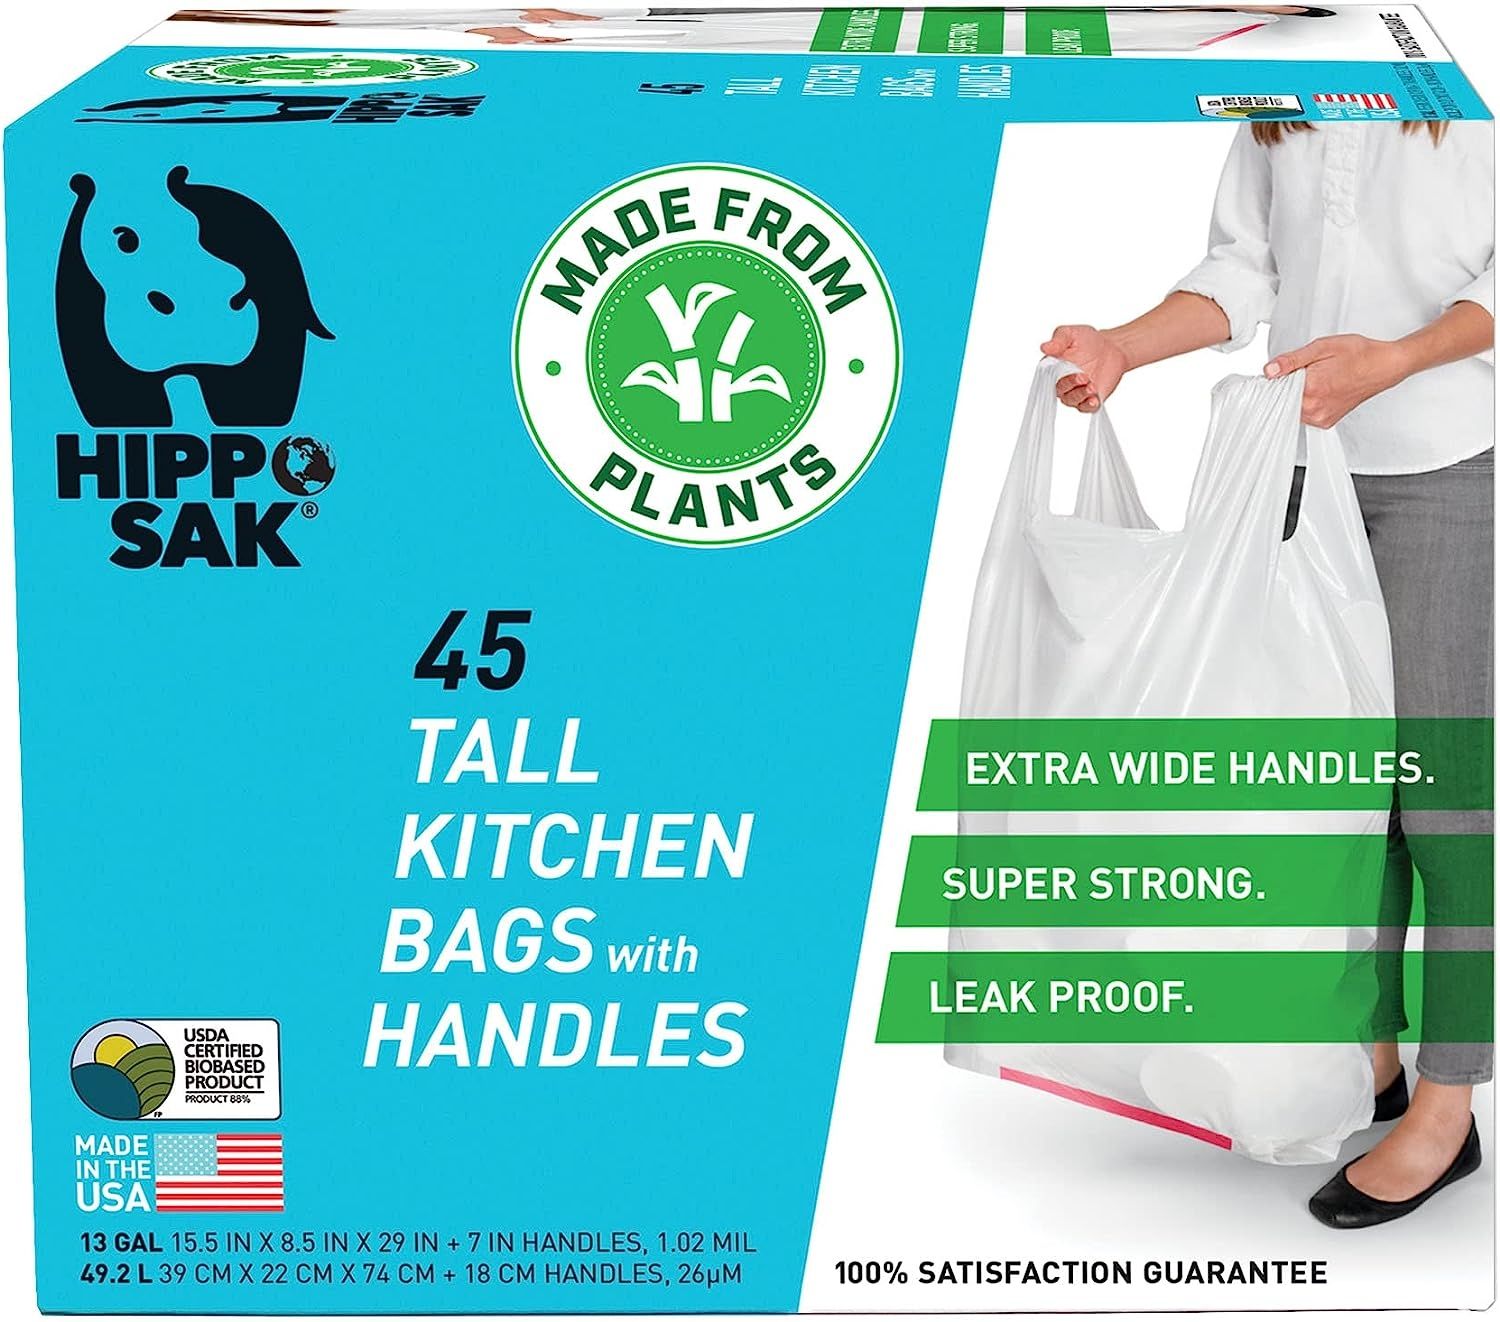 5 Best Biodegradable Garbage Bags in 2023 for Different Uses